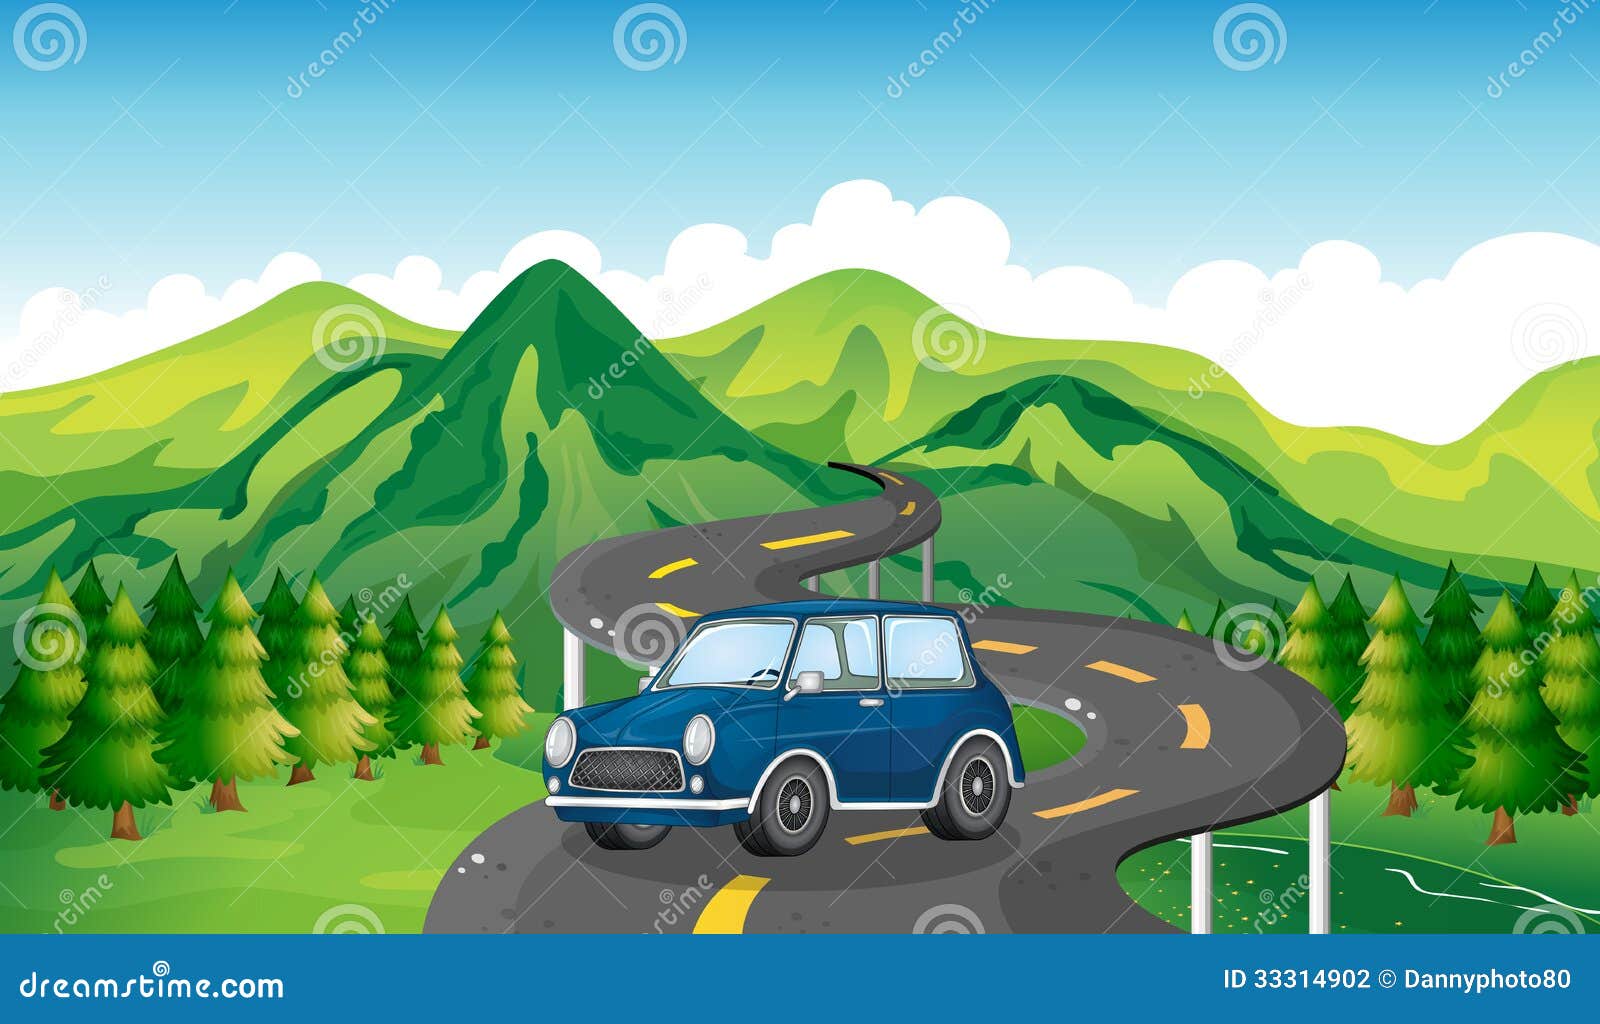 clipart car driving on road - photo #15